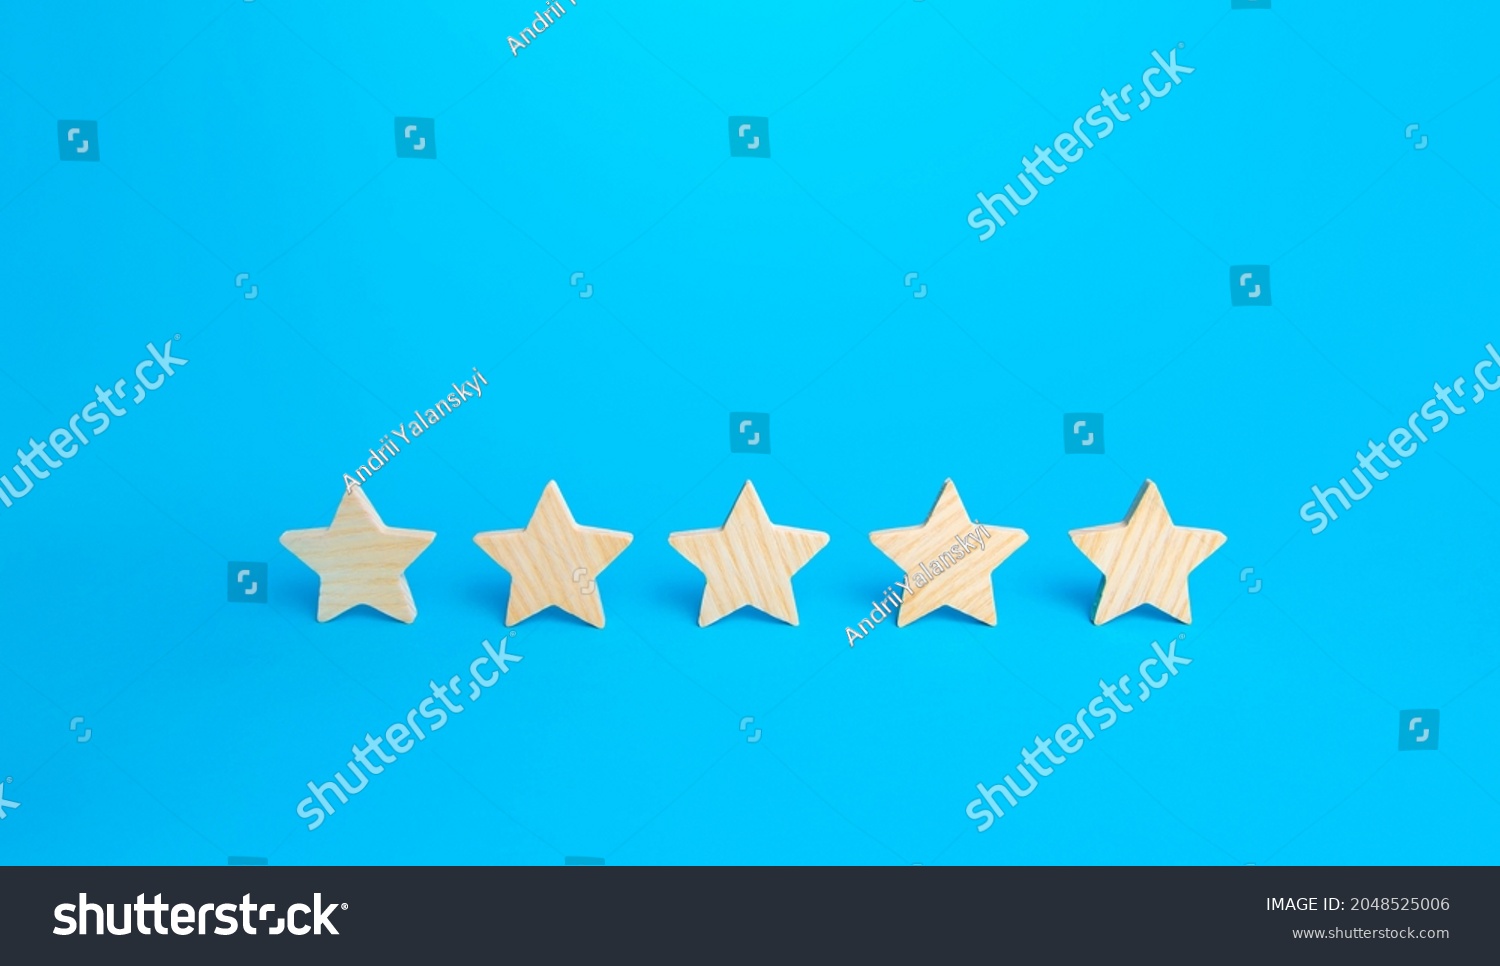 Five stars on a blue background. Rating evaluation concept. High satisfaction. Good reputation. Popularity rating of restaurants, hotels or mobile applications. Highest score. Service quality feedback #2048525006